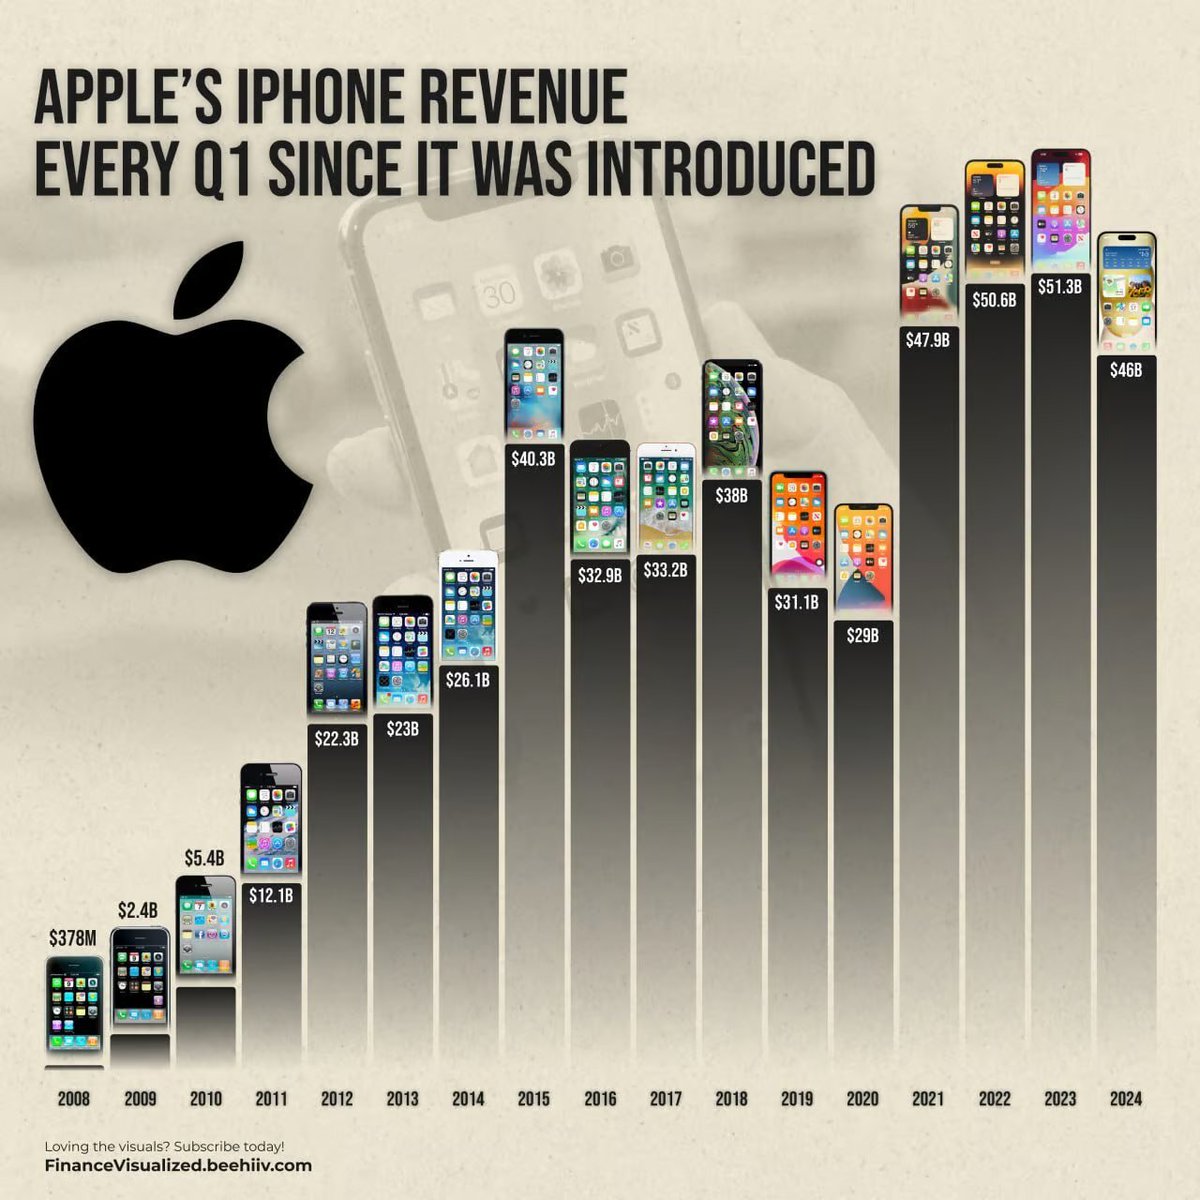 Apple's $AAPL iPhone revenue every Q1 since the smartphone was first introduced